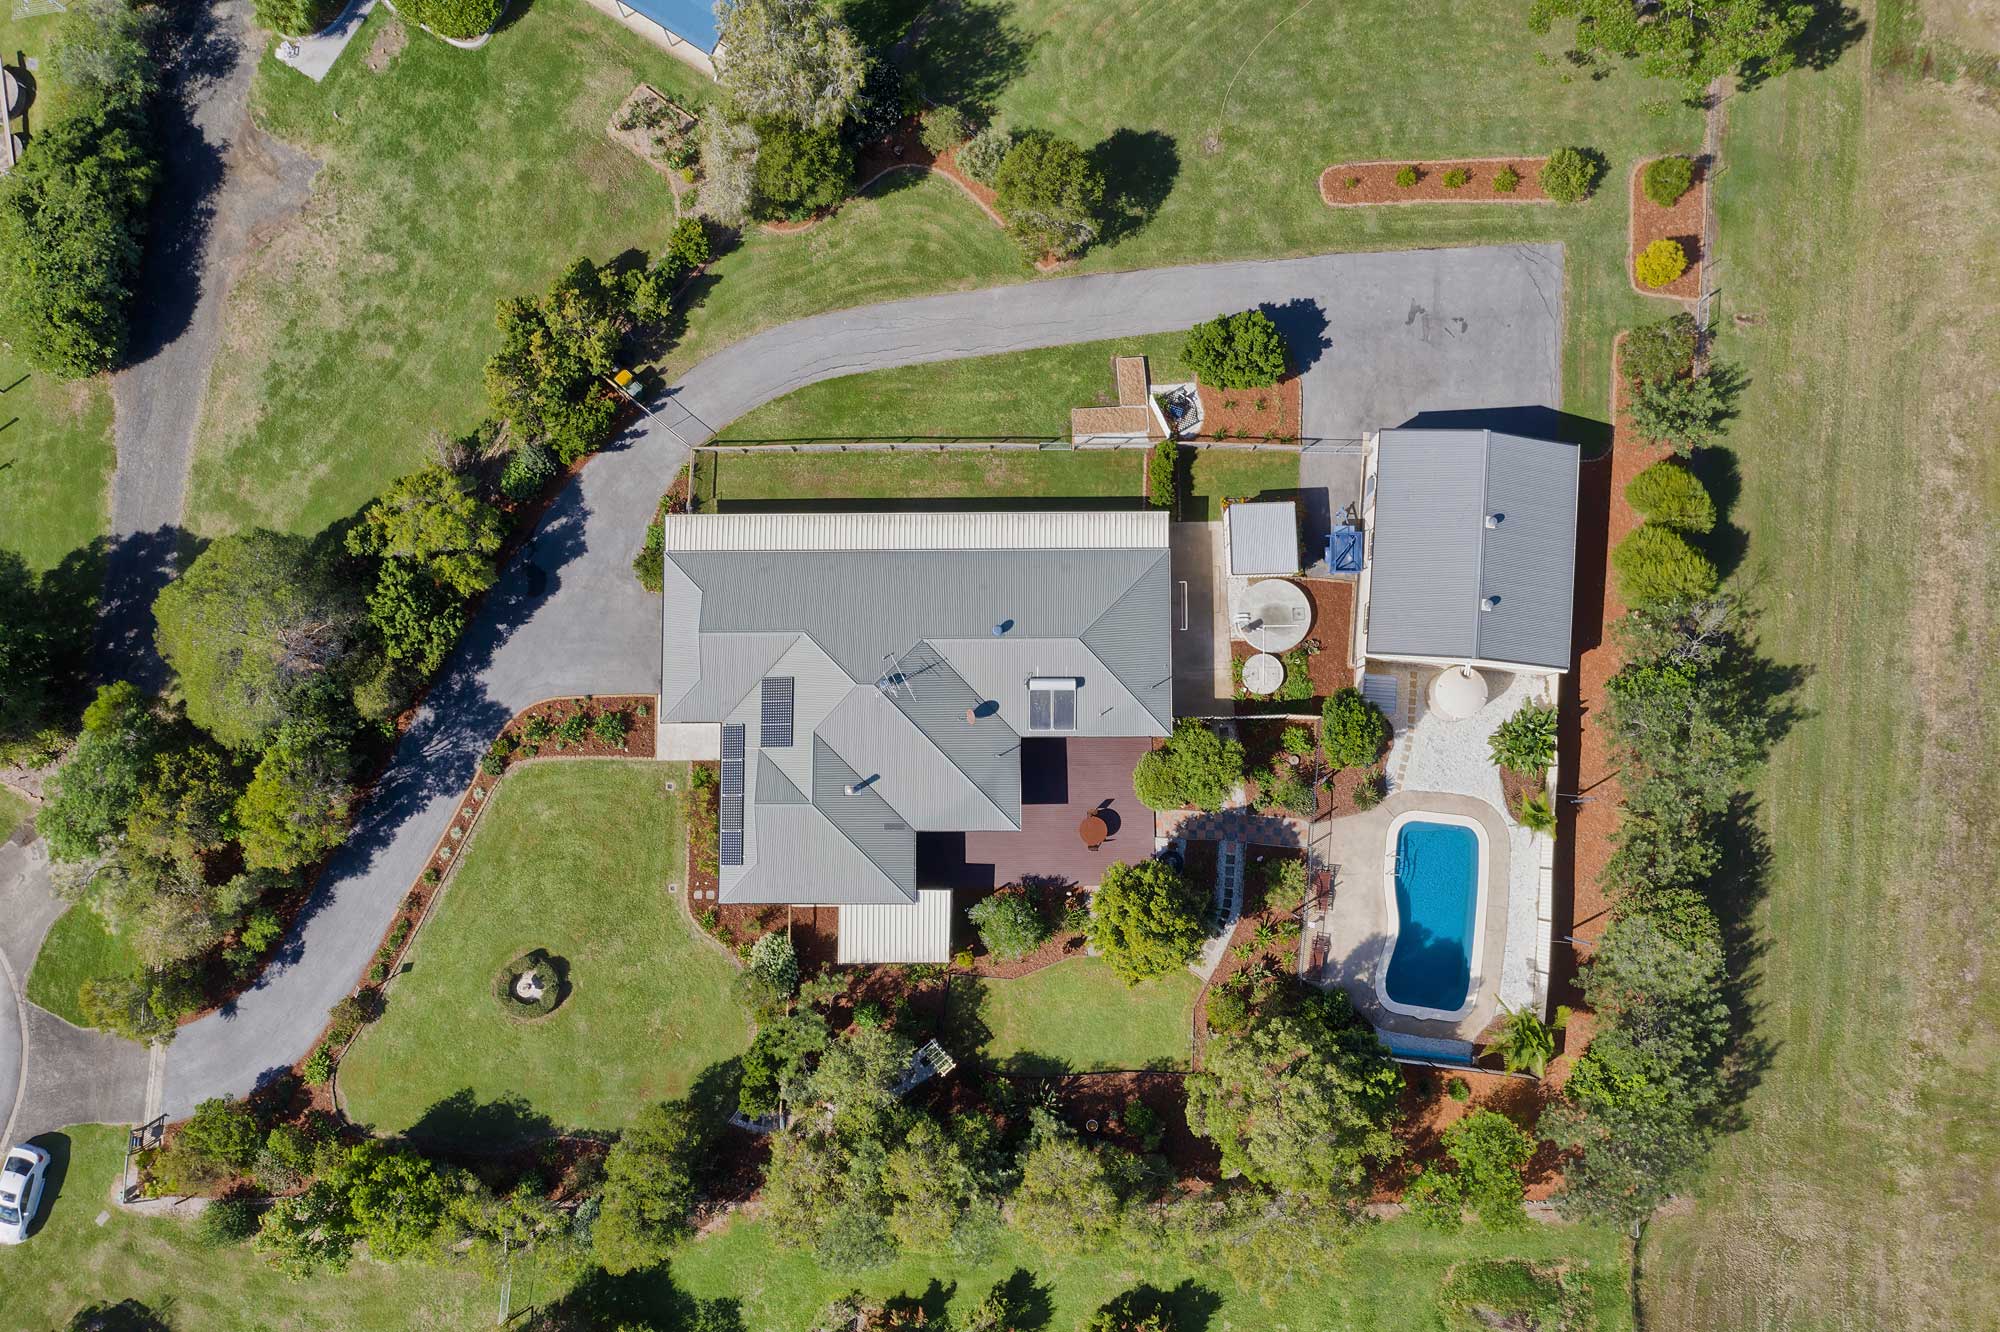 Drone photography at 33 Shergar Court Jimboomba for a real estate listing